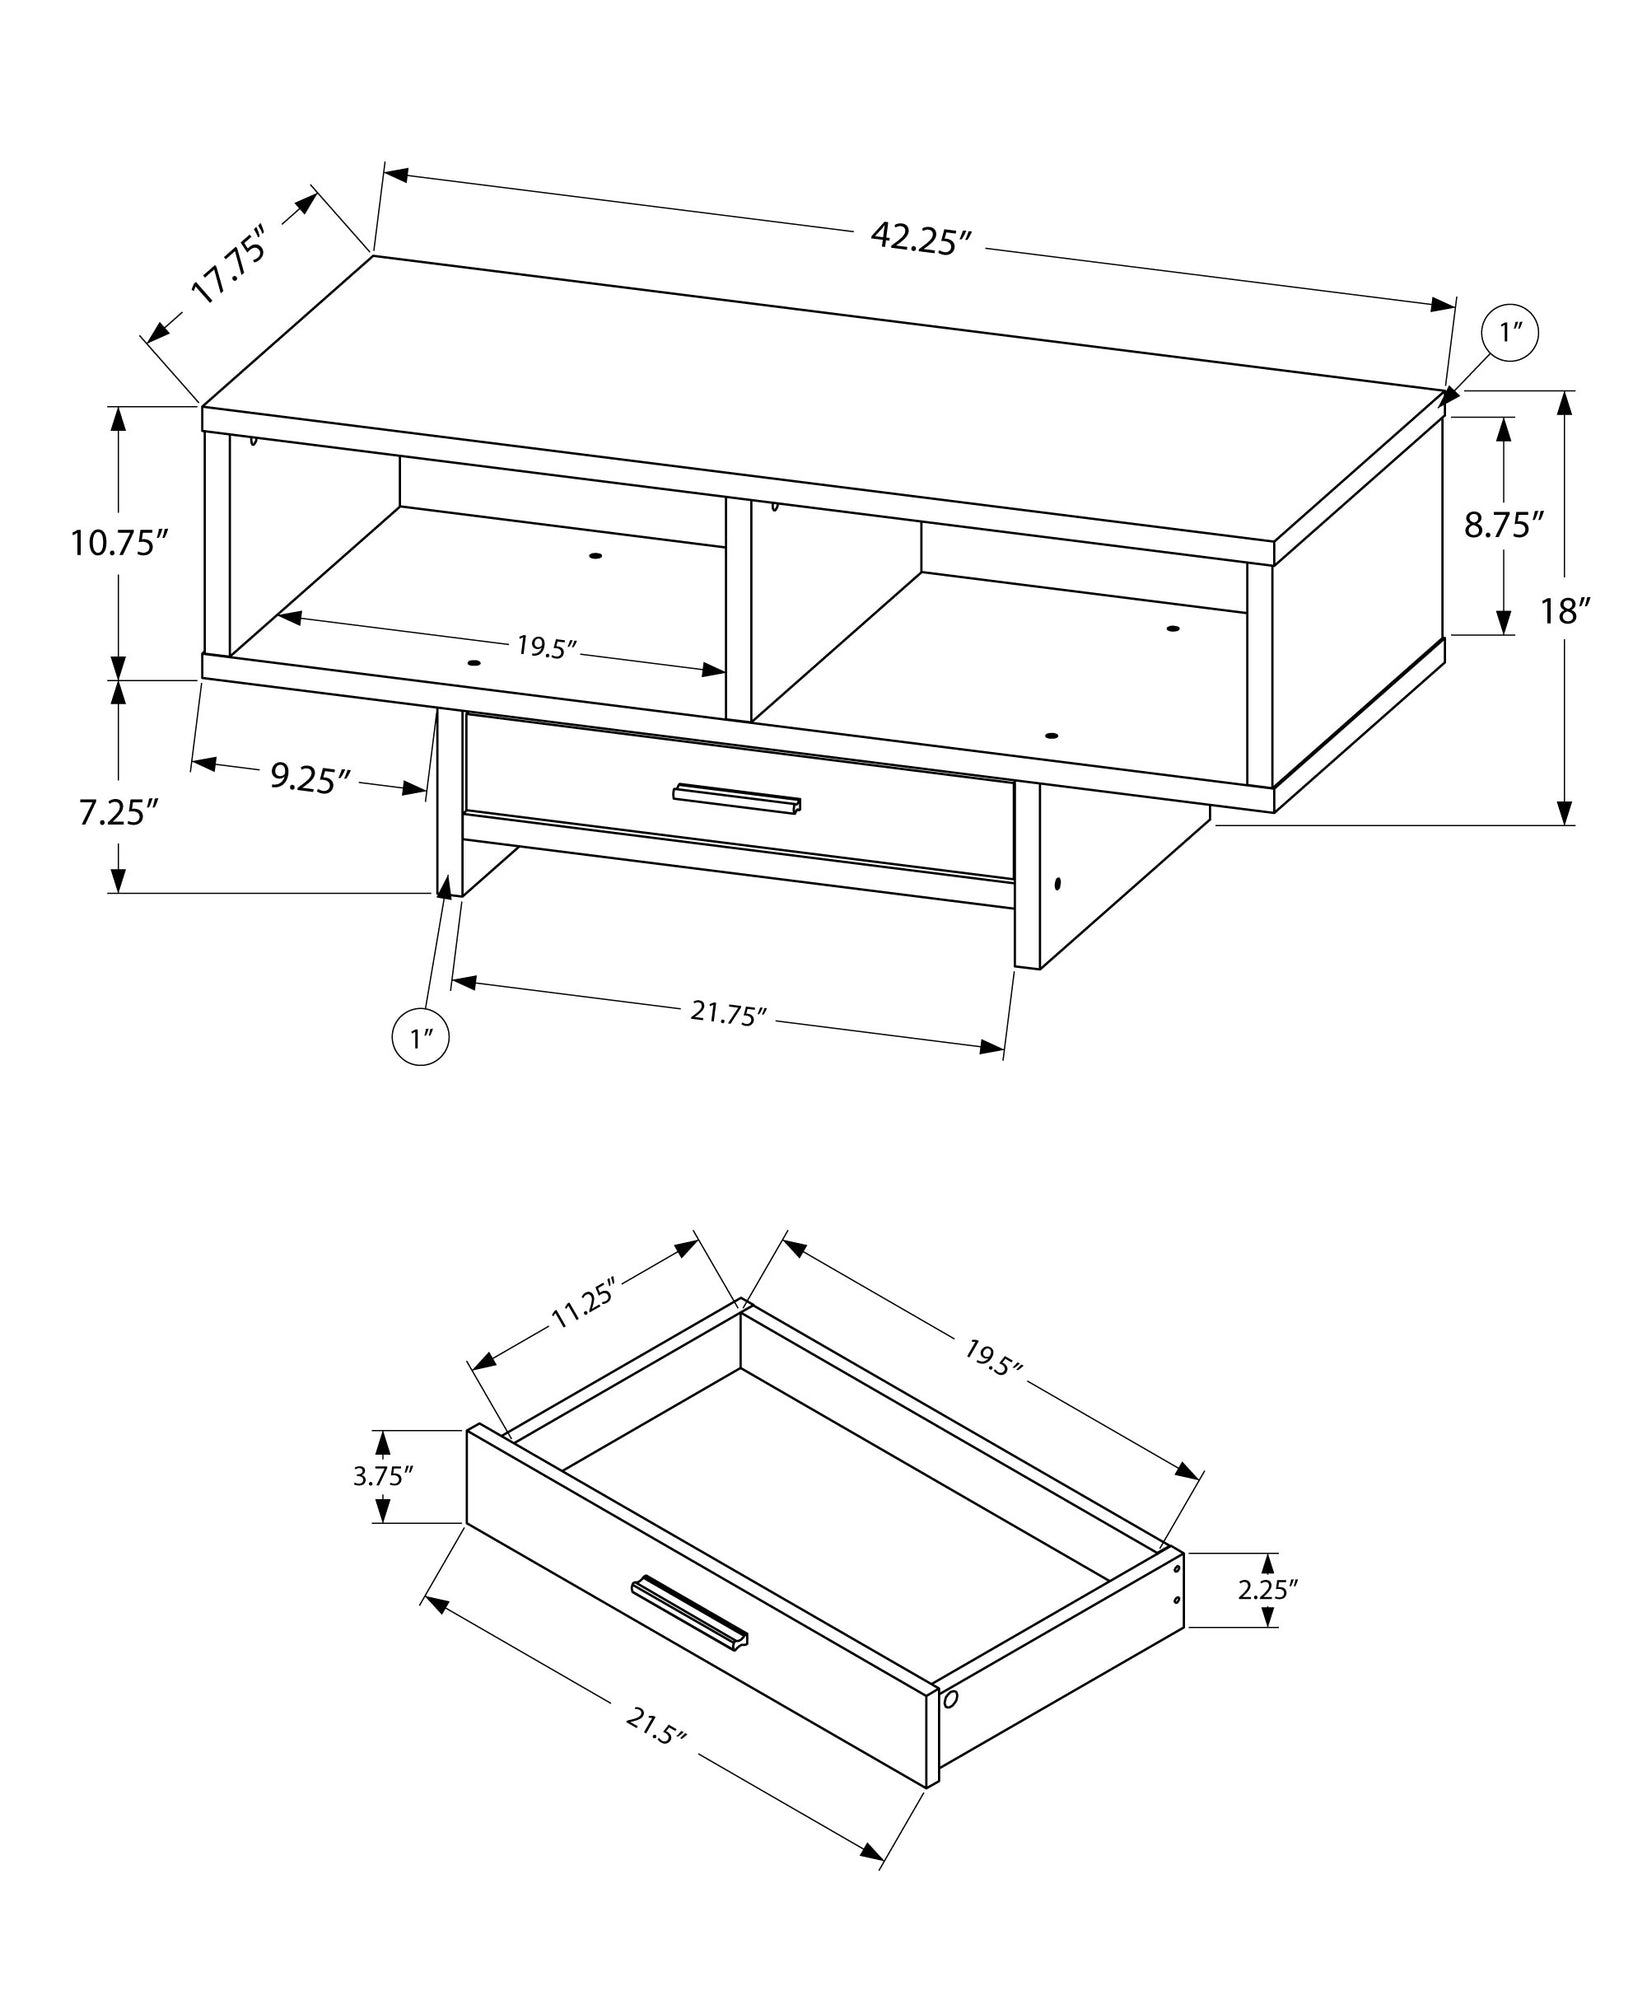 Coffee Table - White With Storage